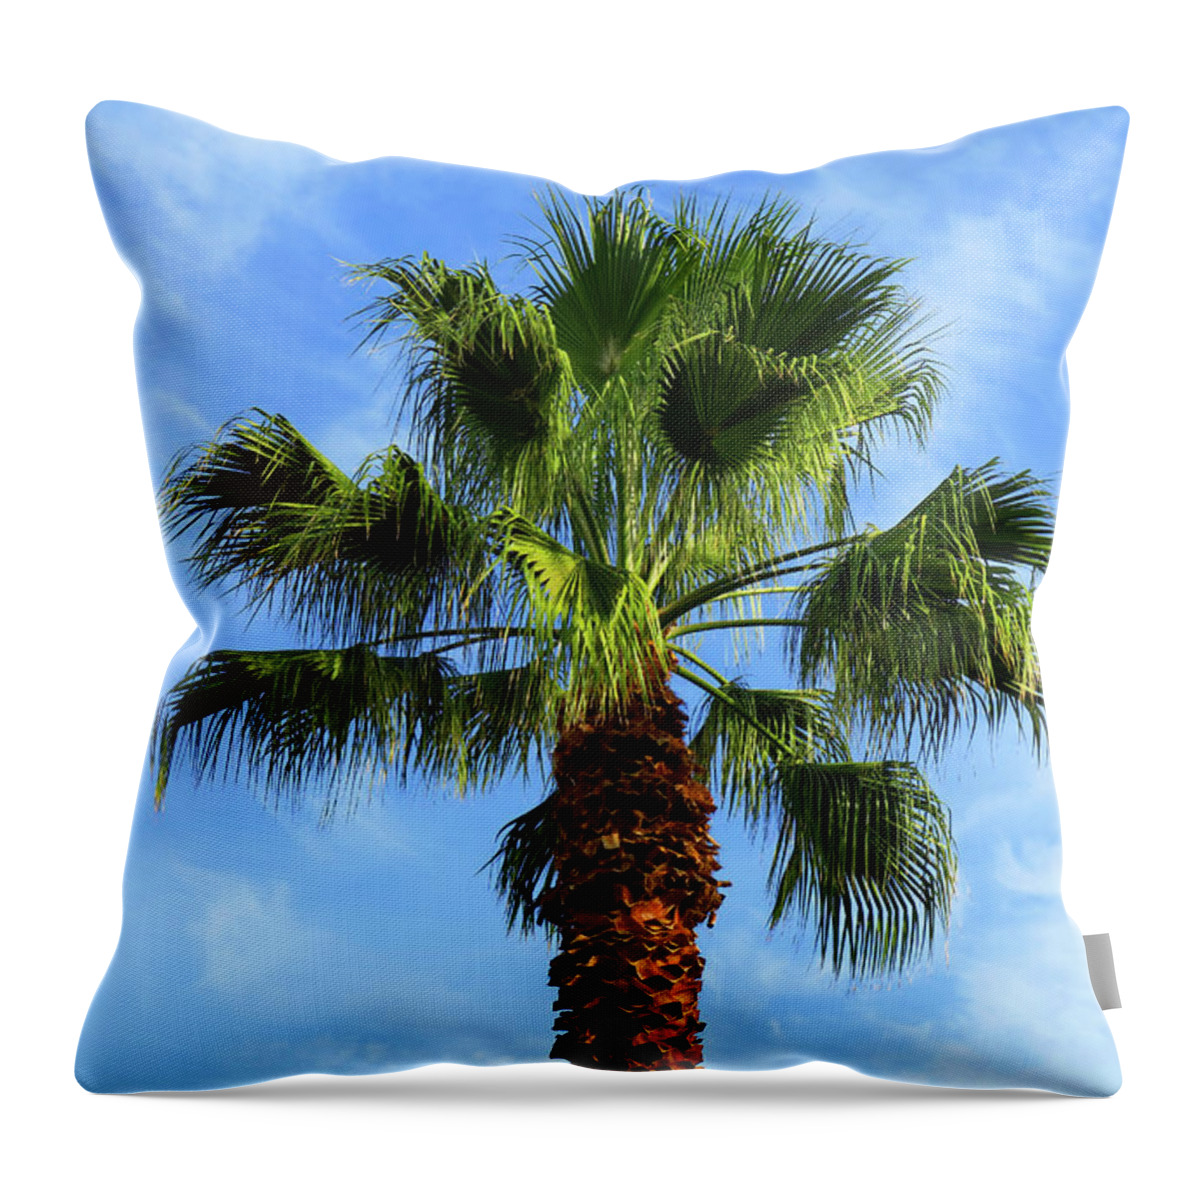 Palm Tree Throw Pillow featuring the photograph Palm Tree, Blue Sky, Wispy Clouds by Ram Vasudev